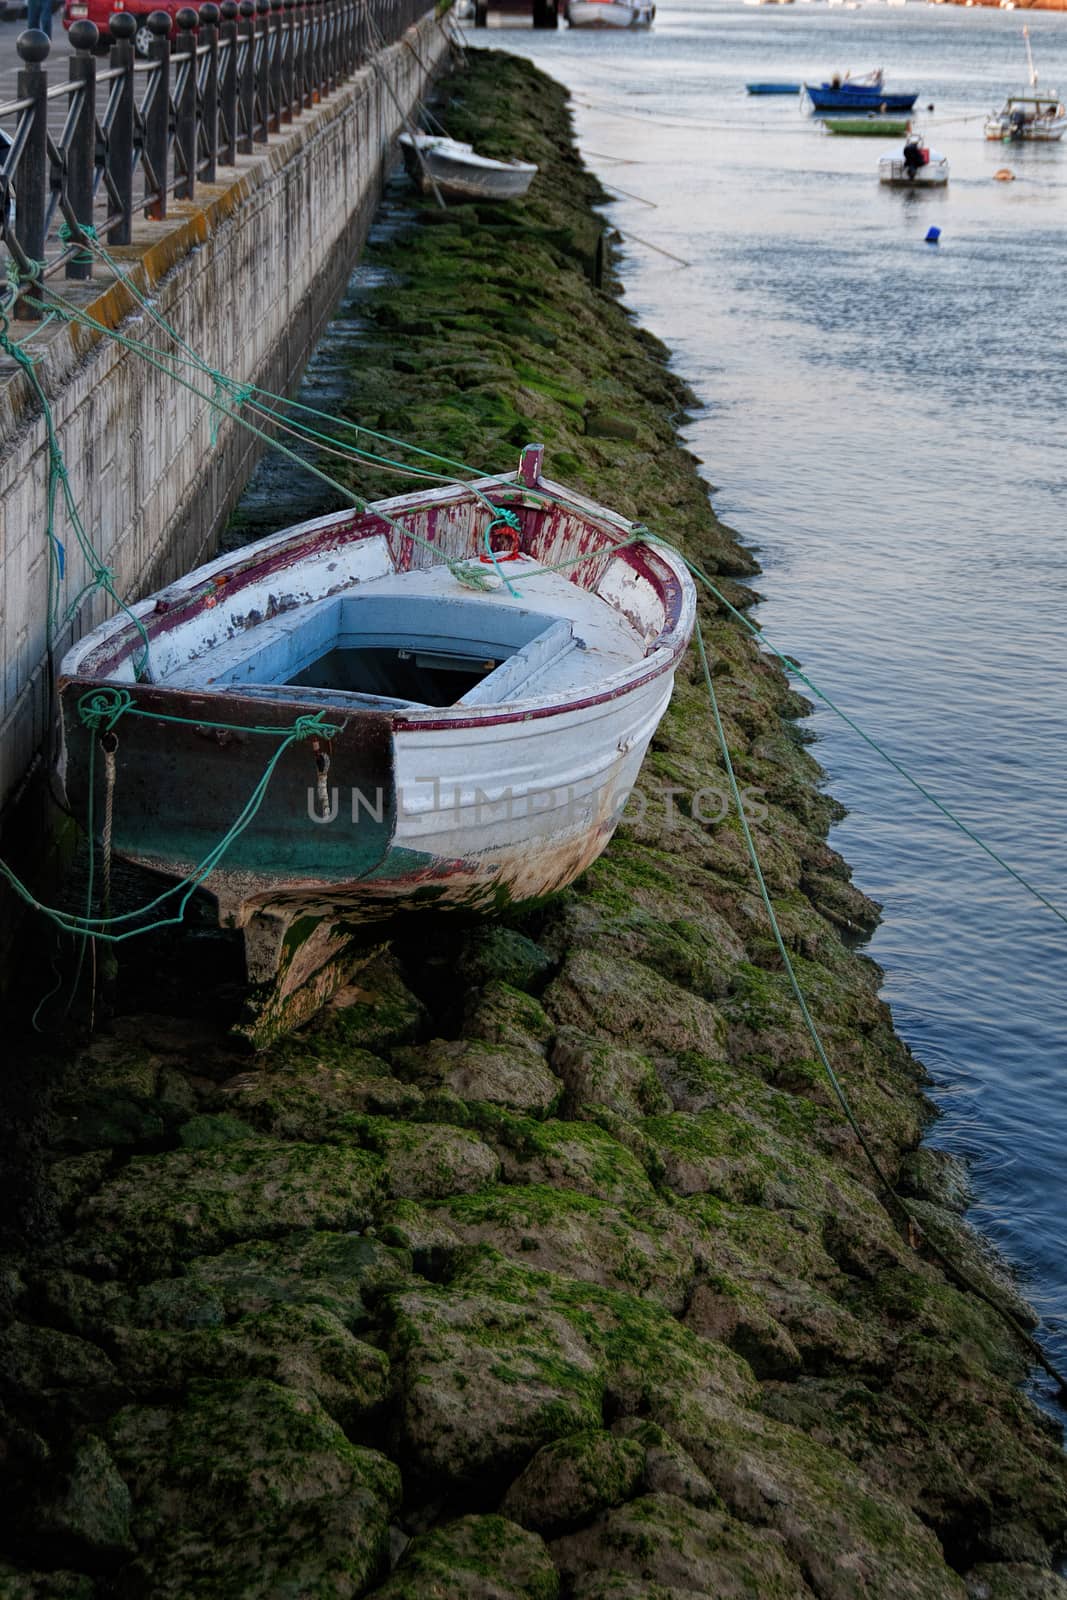 Low tide in an Spanish river with a boat on the rocks